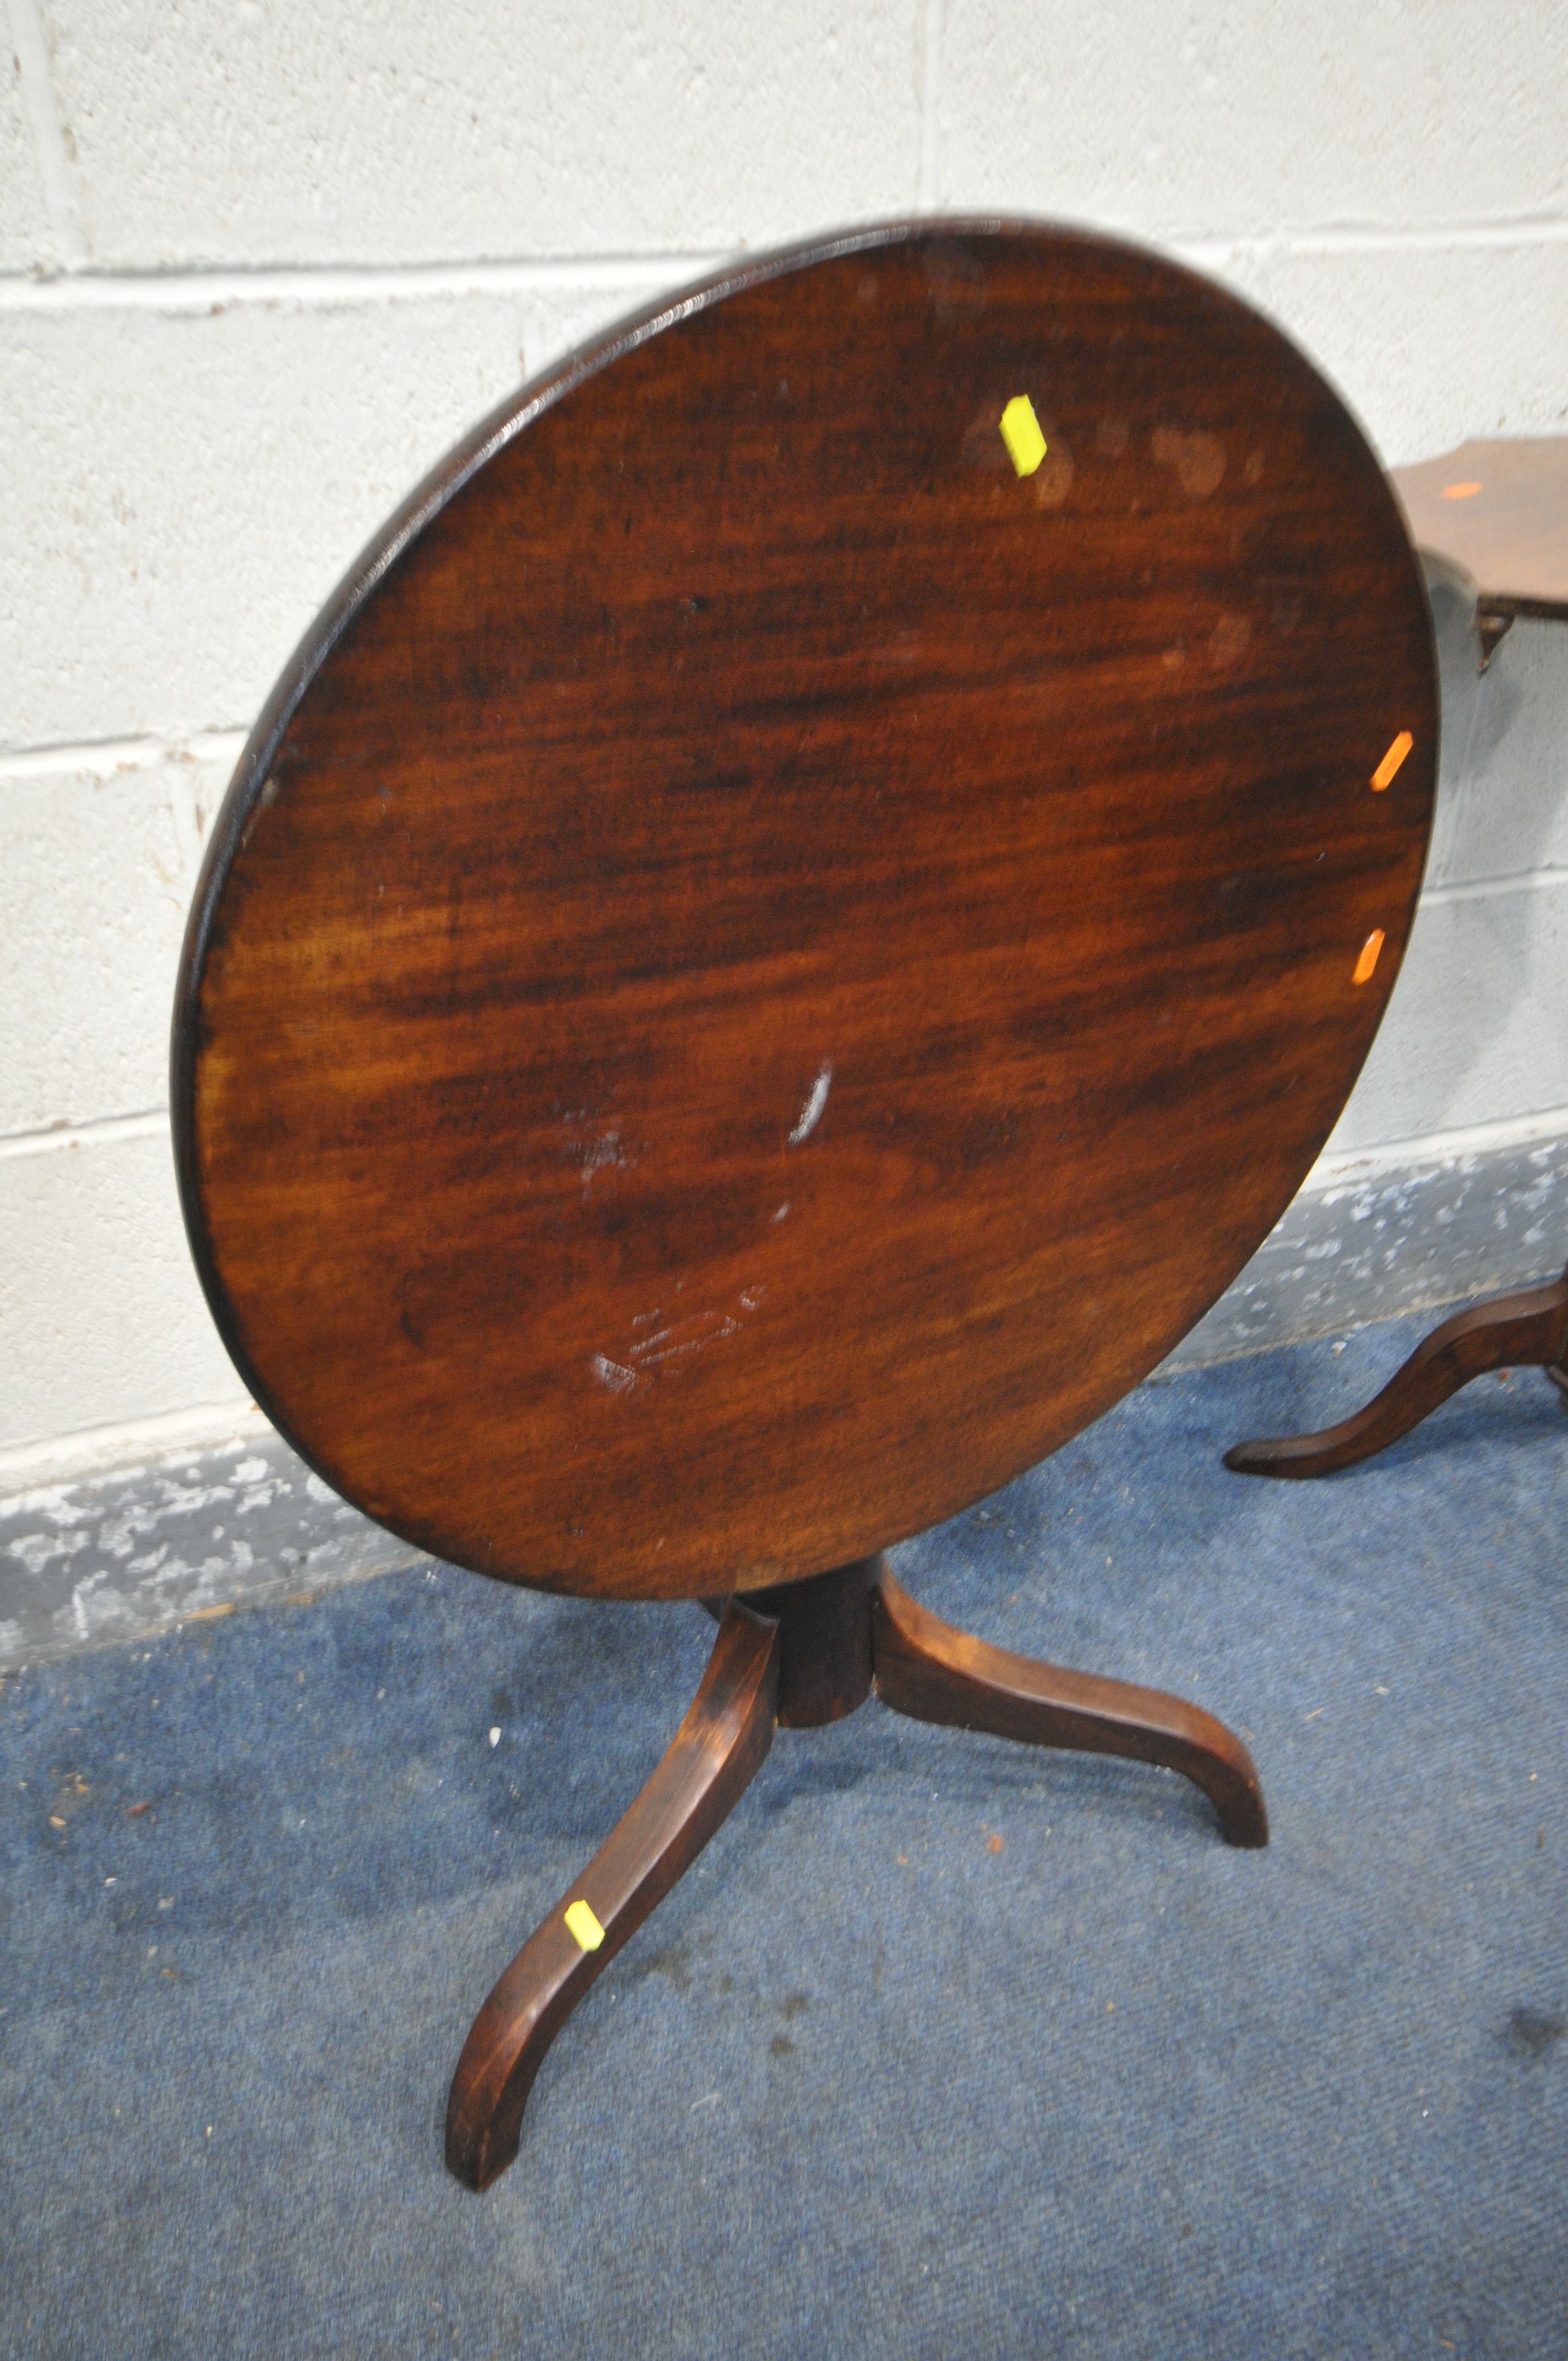 A 19TH CENTURY MAHOGANY TRIPOD TABLE, with a wavy top on a bobbin turned support, diameter 52cm x - Image 4 of 4